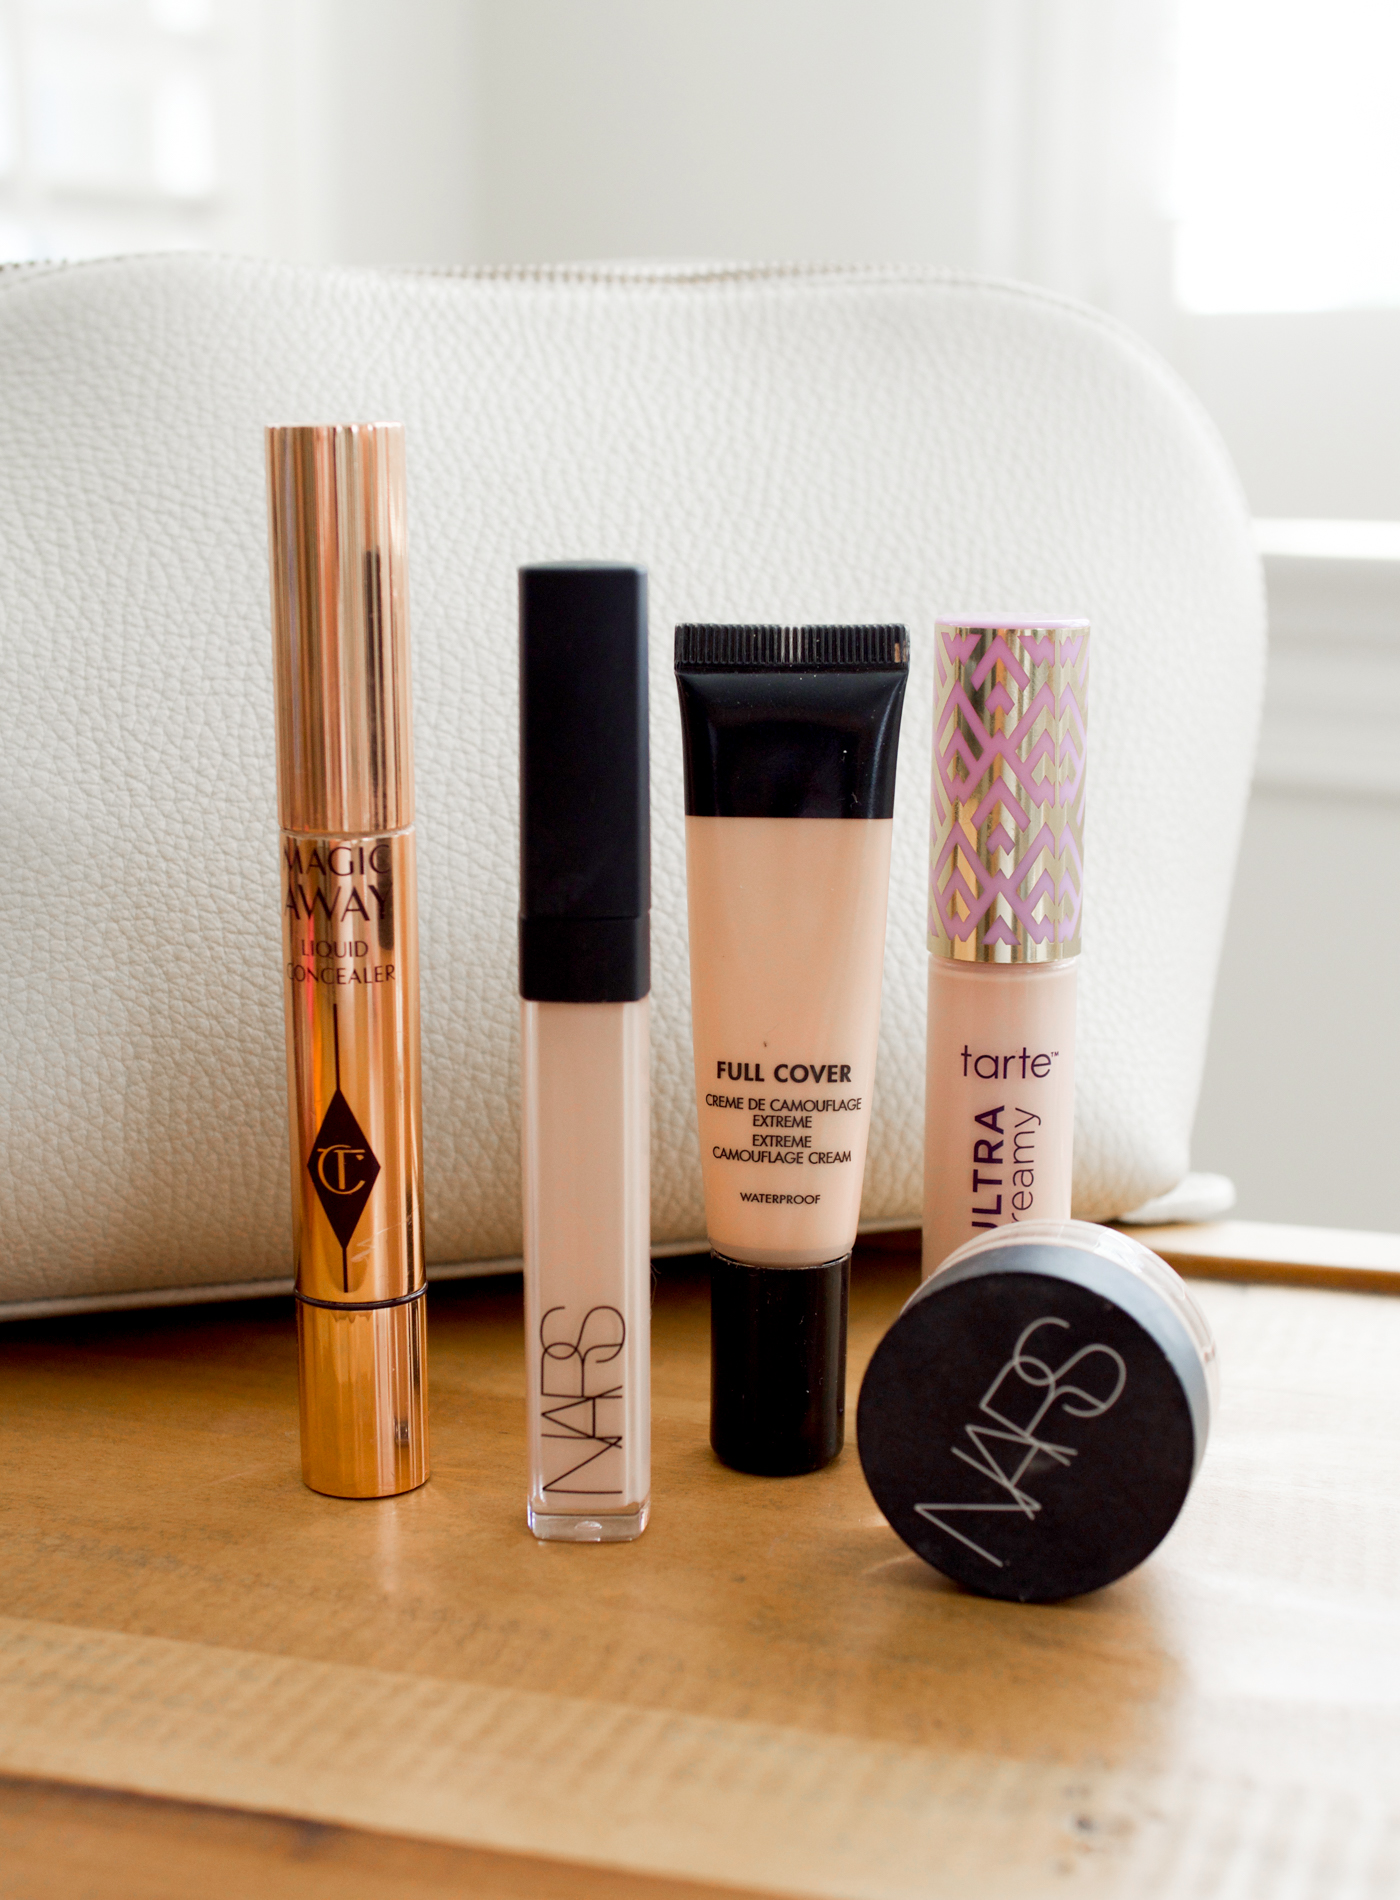 Top Concealers (for blemishes and under eye!)